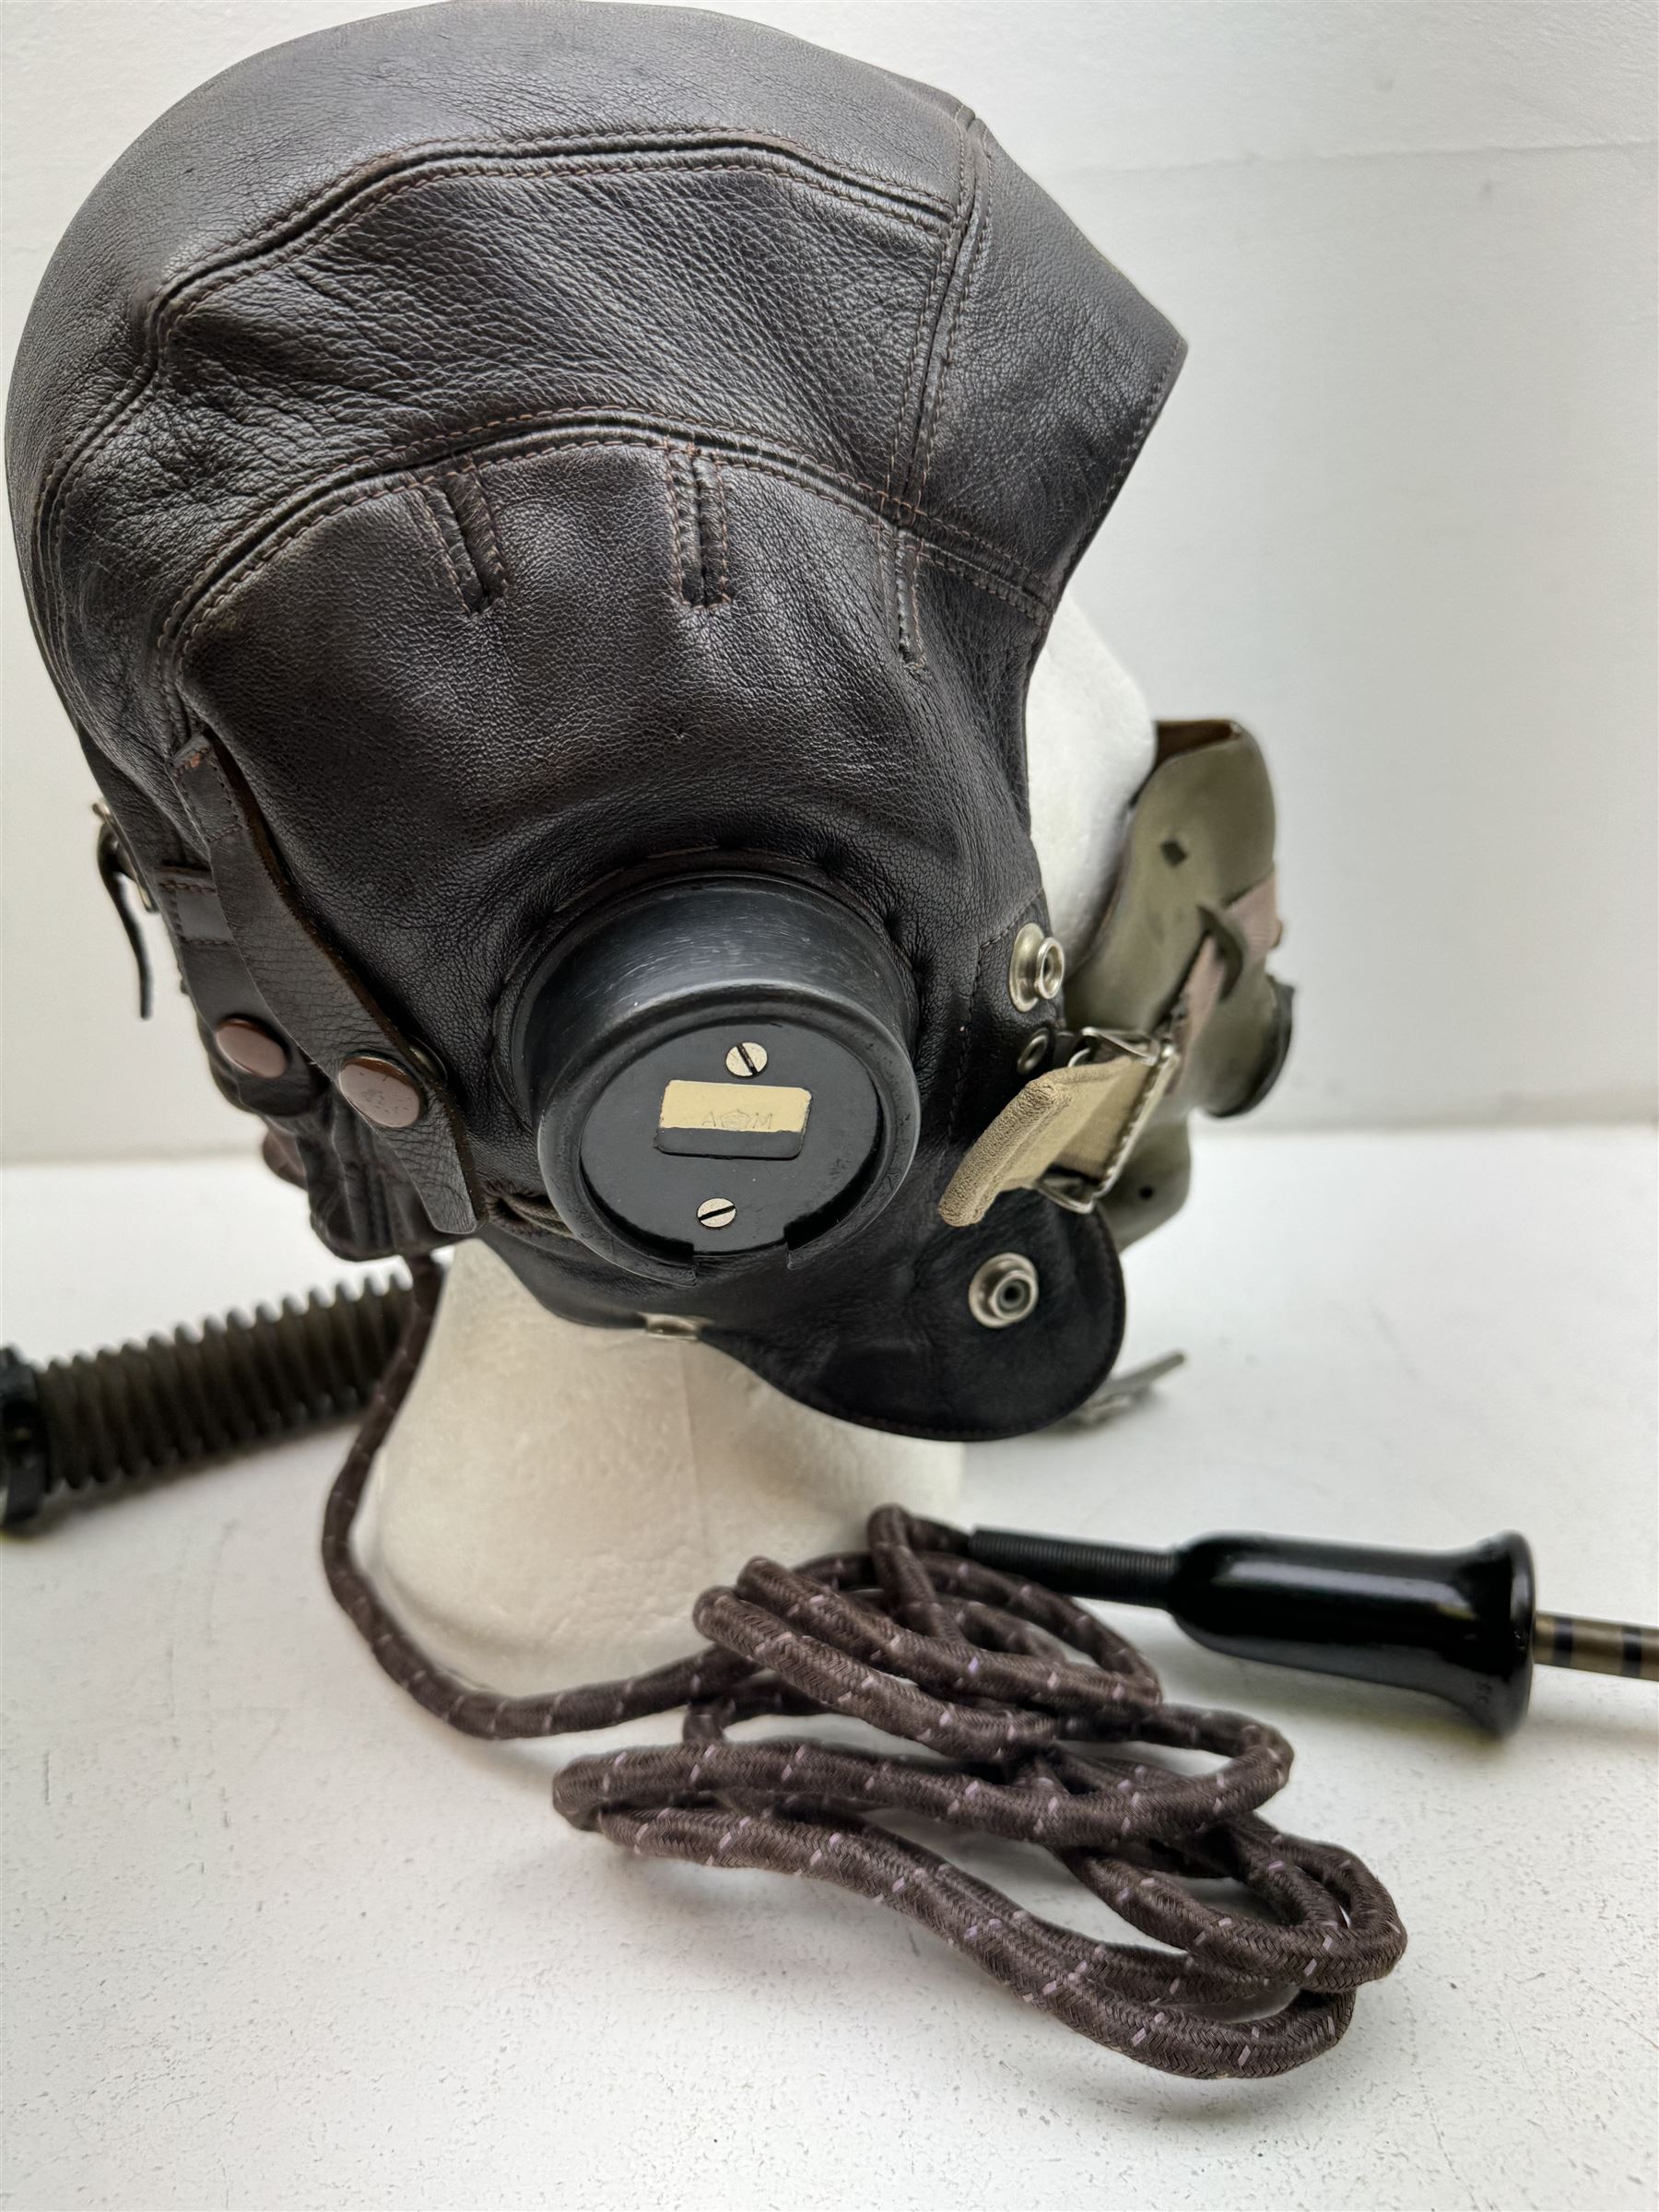 British RAF Flying Helmet complete with AM marked headphones and wiring loom with jack plug - Image 5 of 6